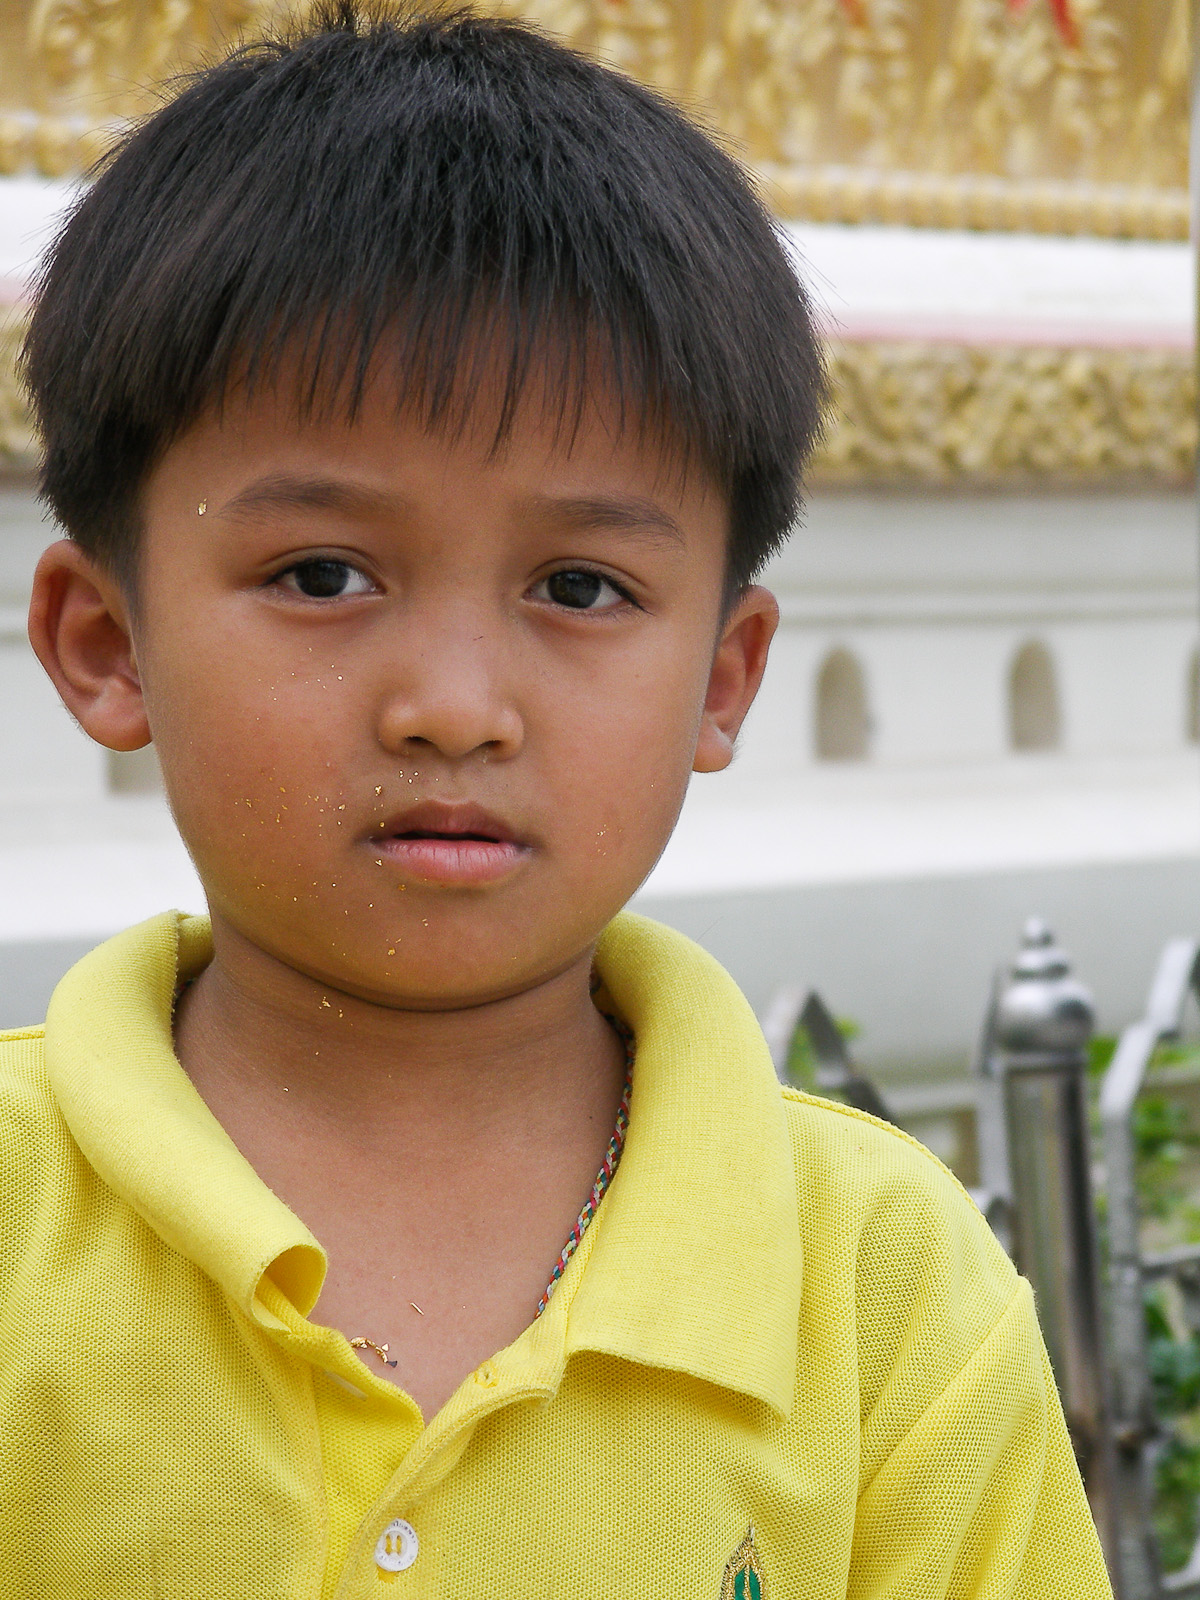 a close up of a child in yellow shirt